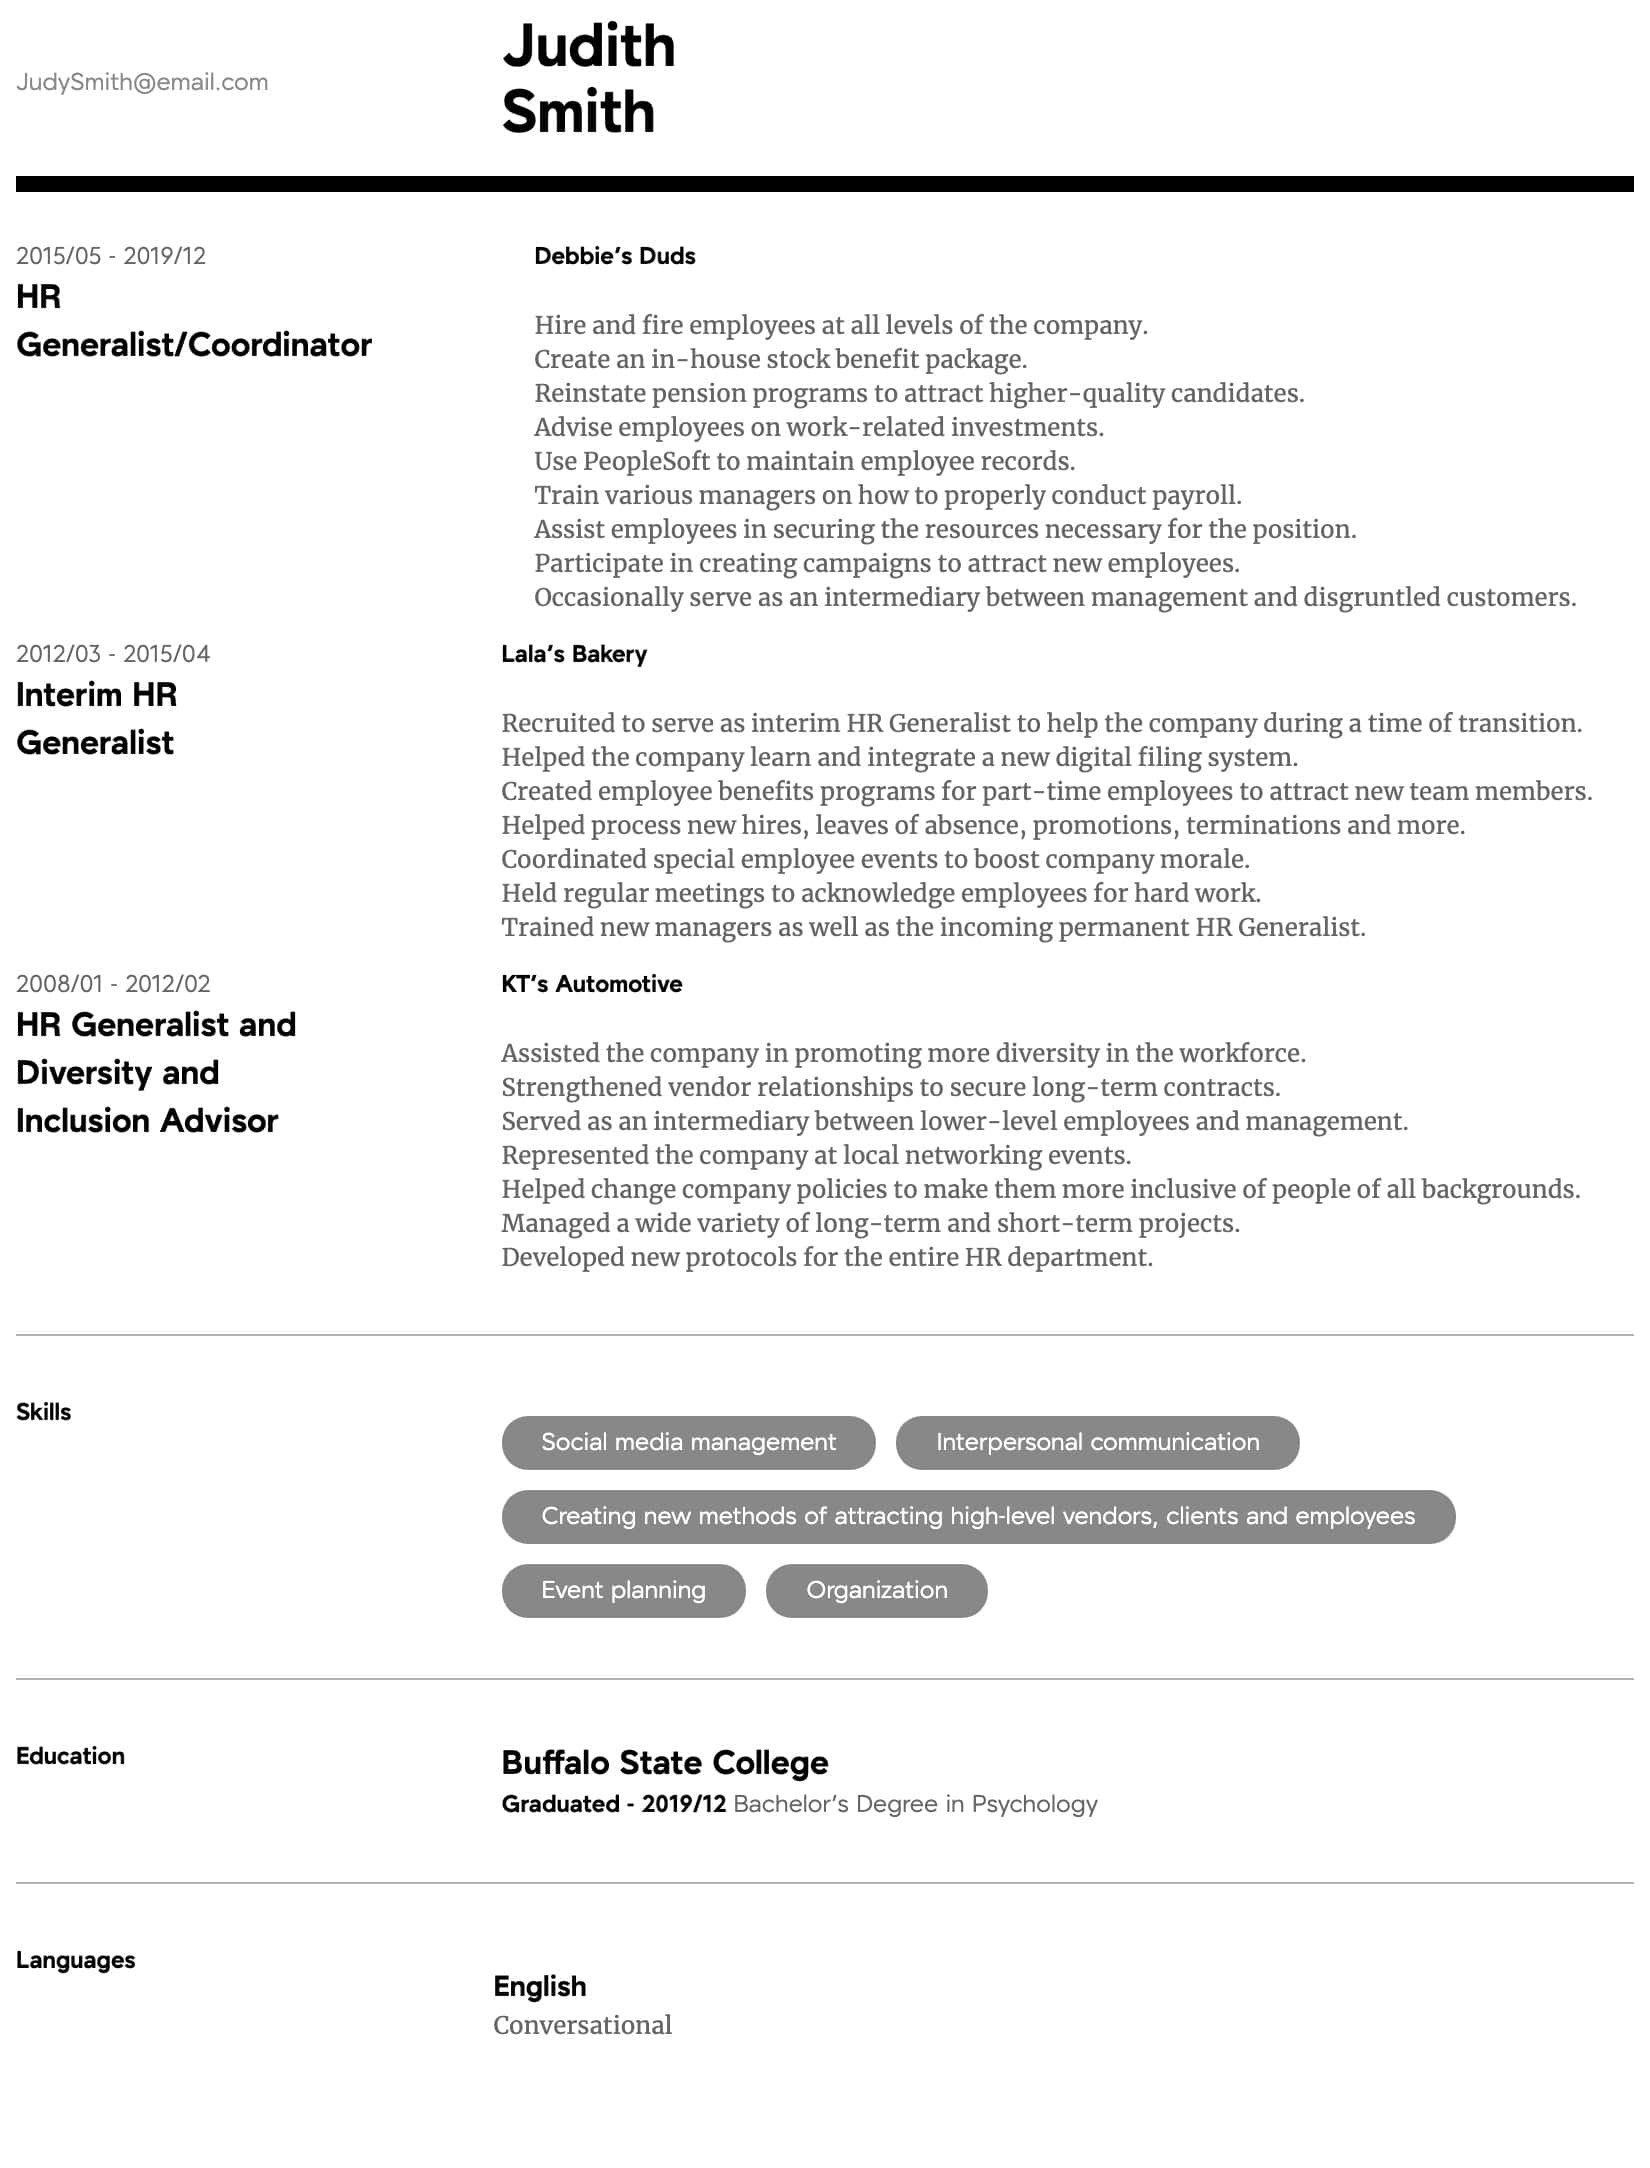 Human Resources Sample Resume Entry Level Hr Generalist Resume Samples All Experience Levels Resume.com …